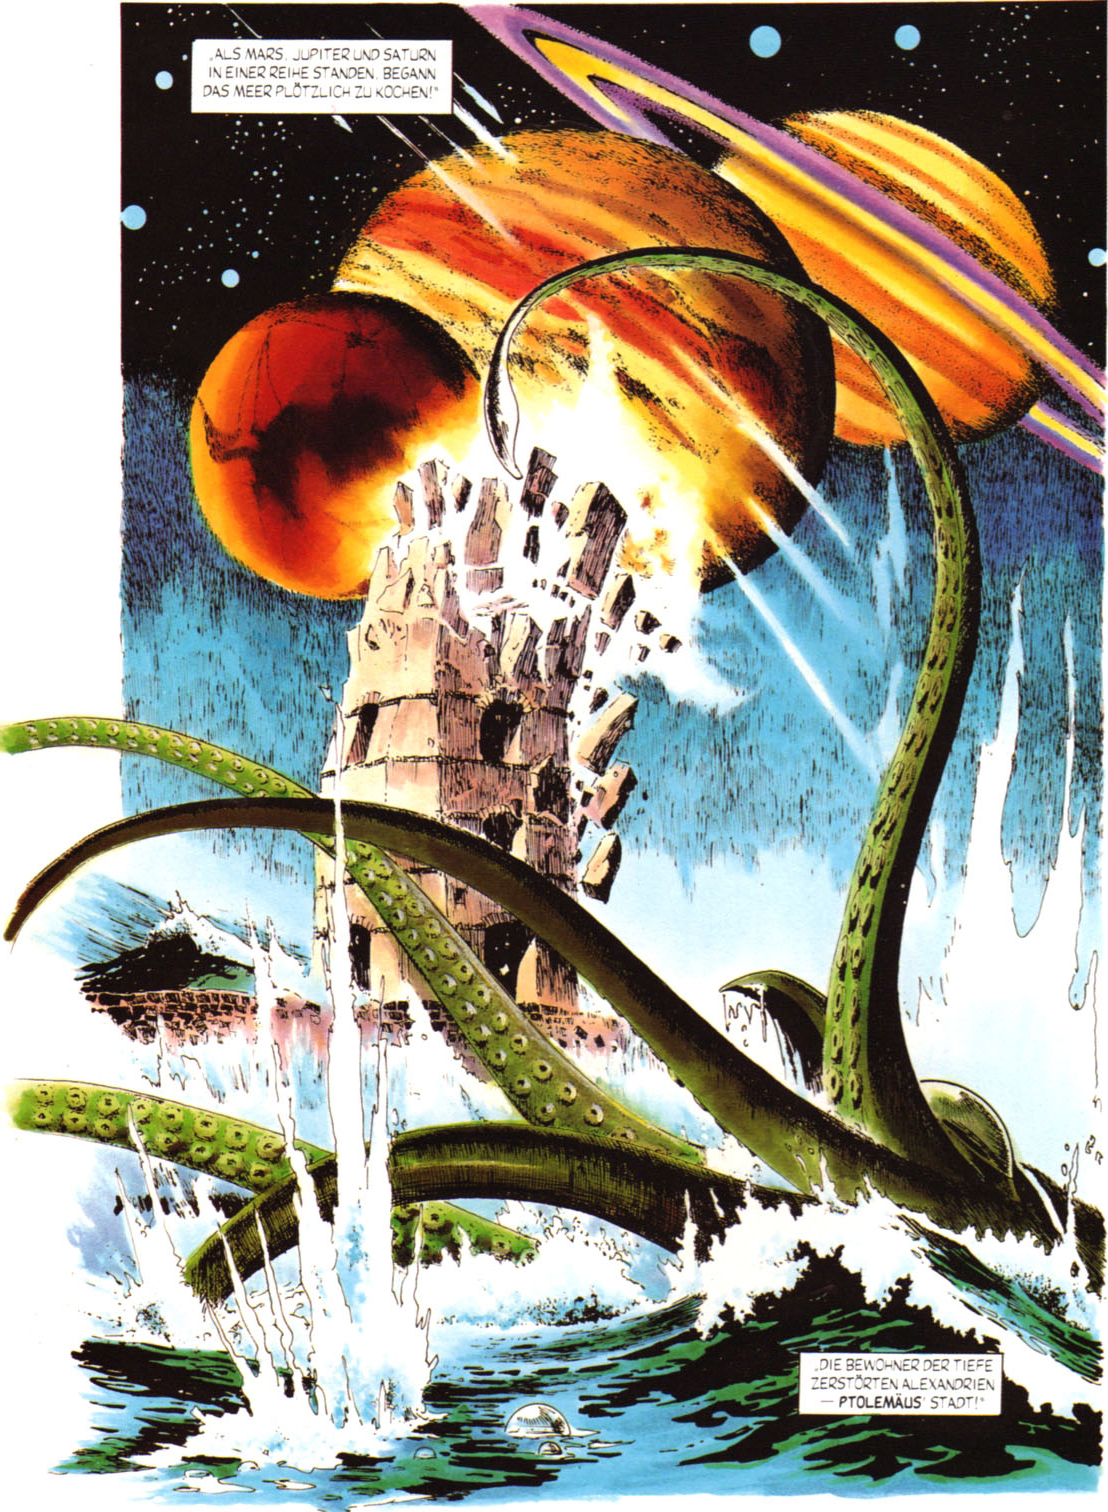 Colourised panel from the German edition